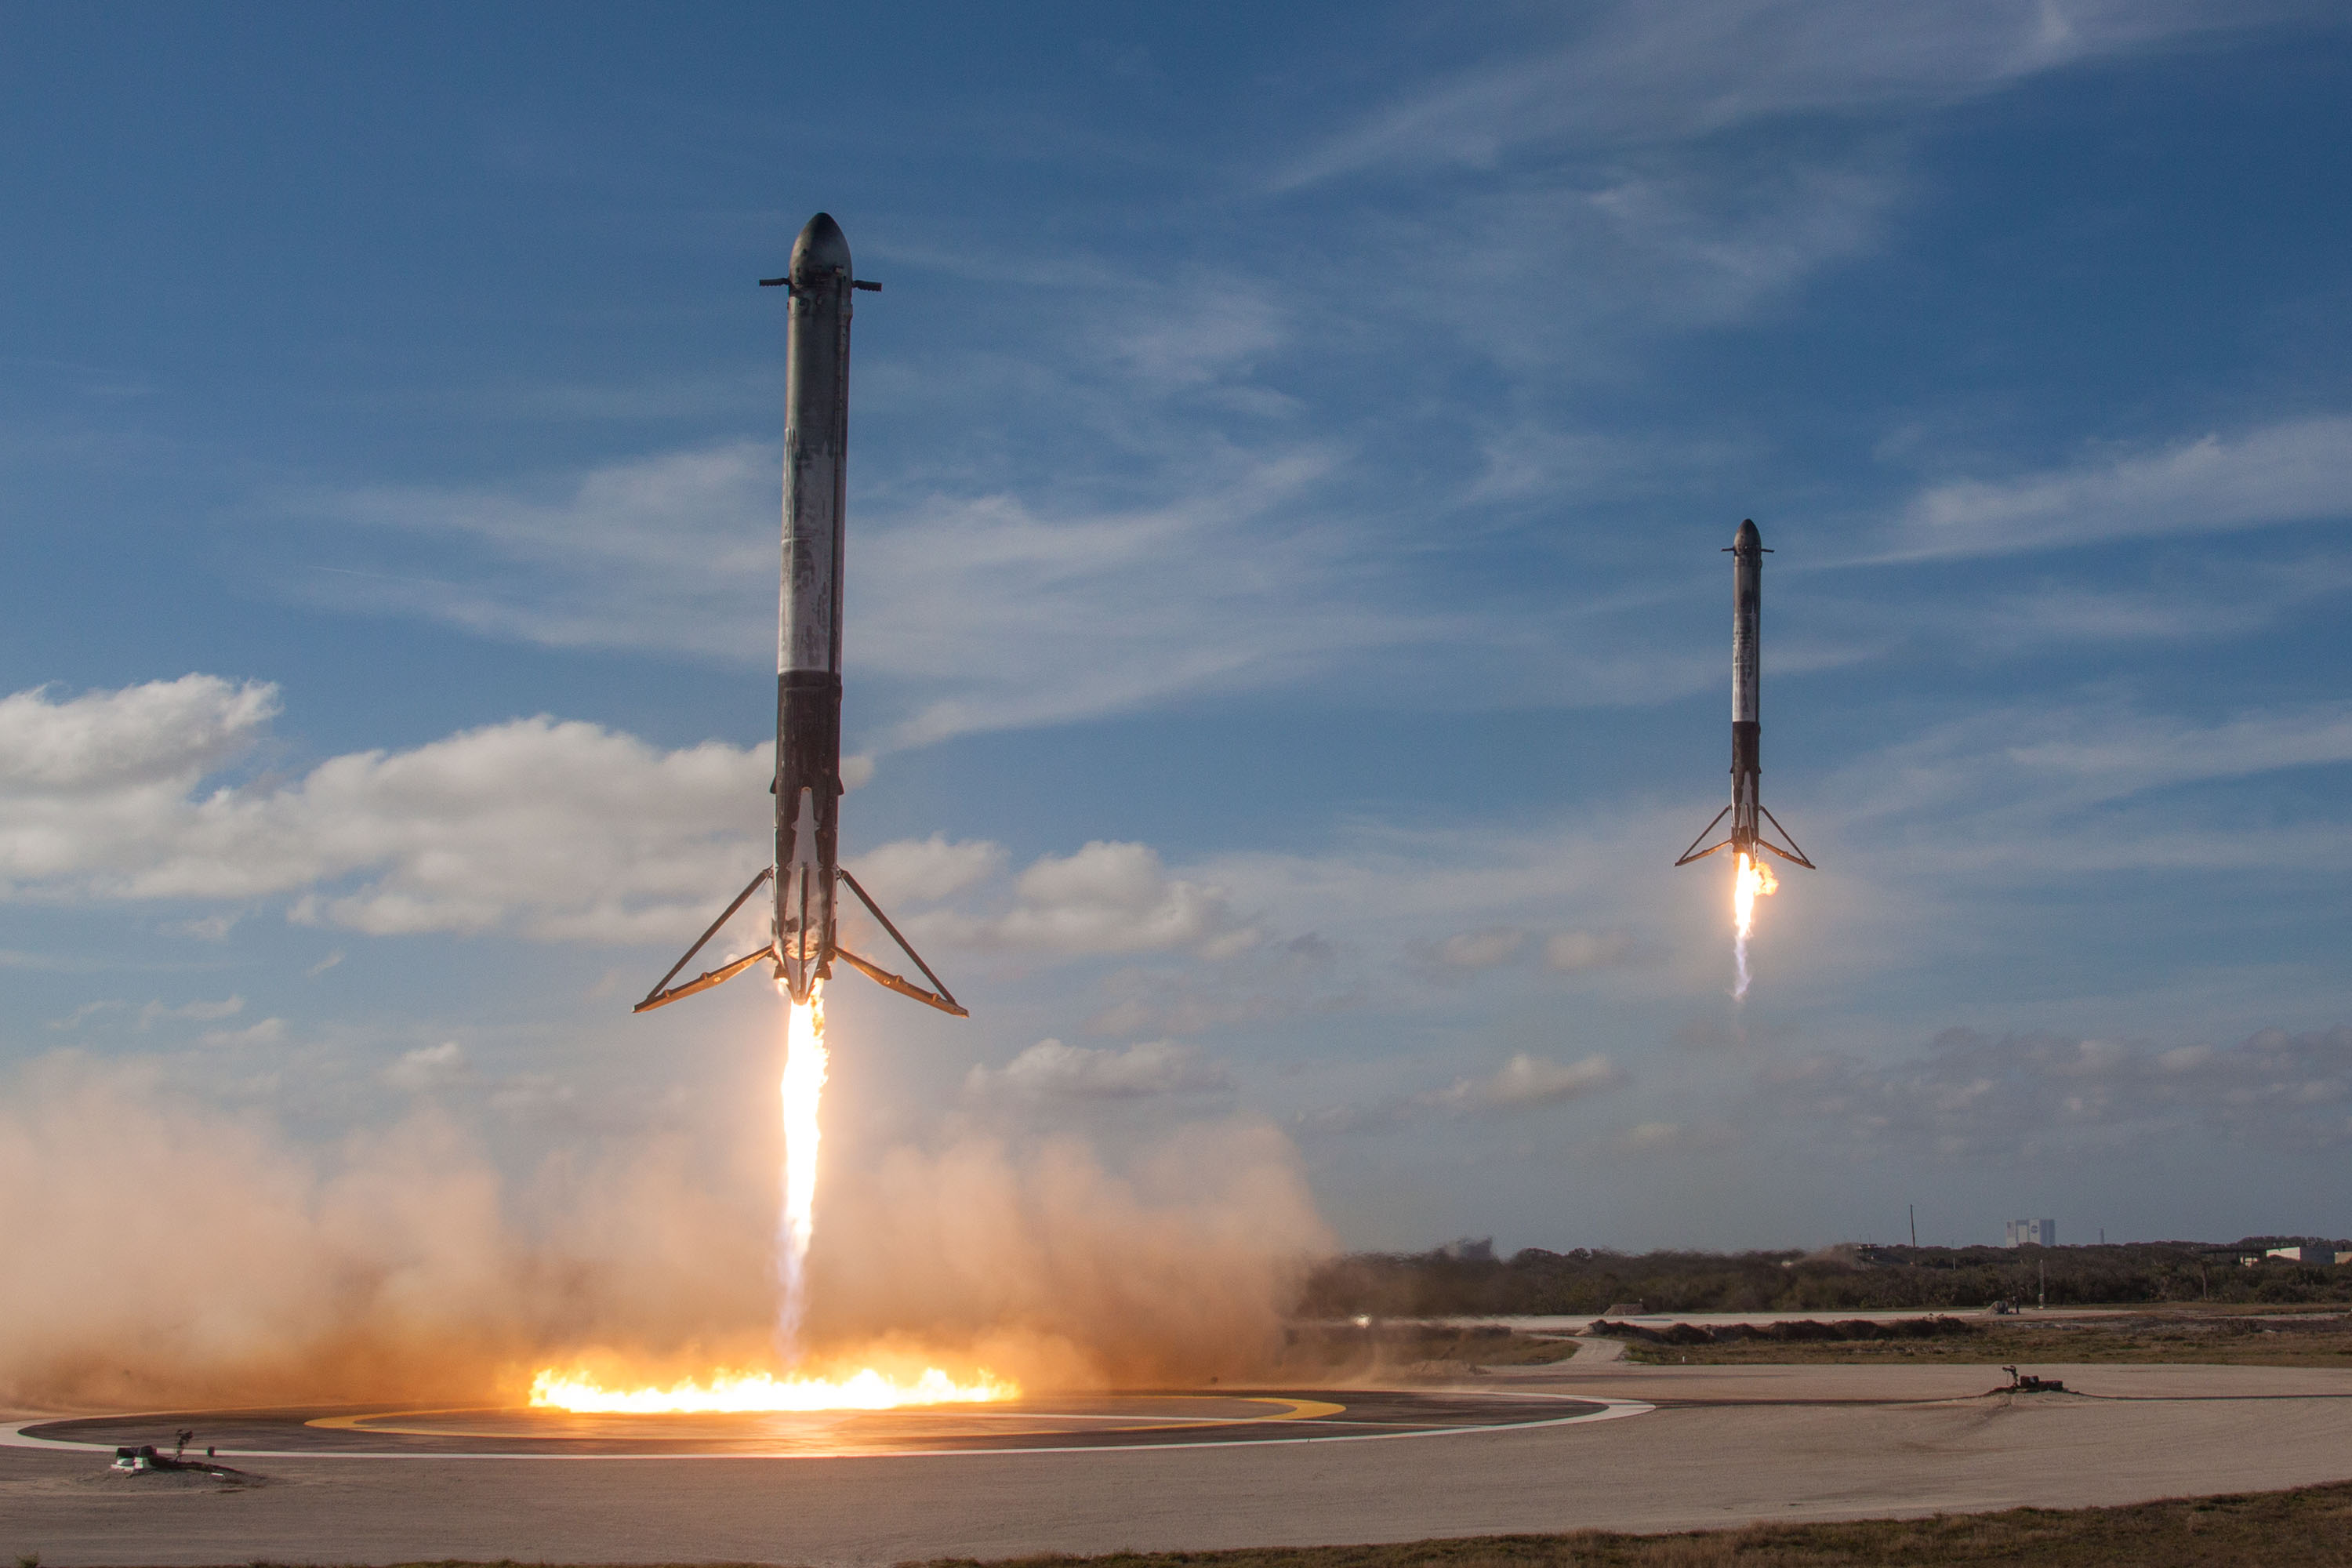 Falcon Heavy side boosters landing in unison, after successfully lofting Starman into orbit